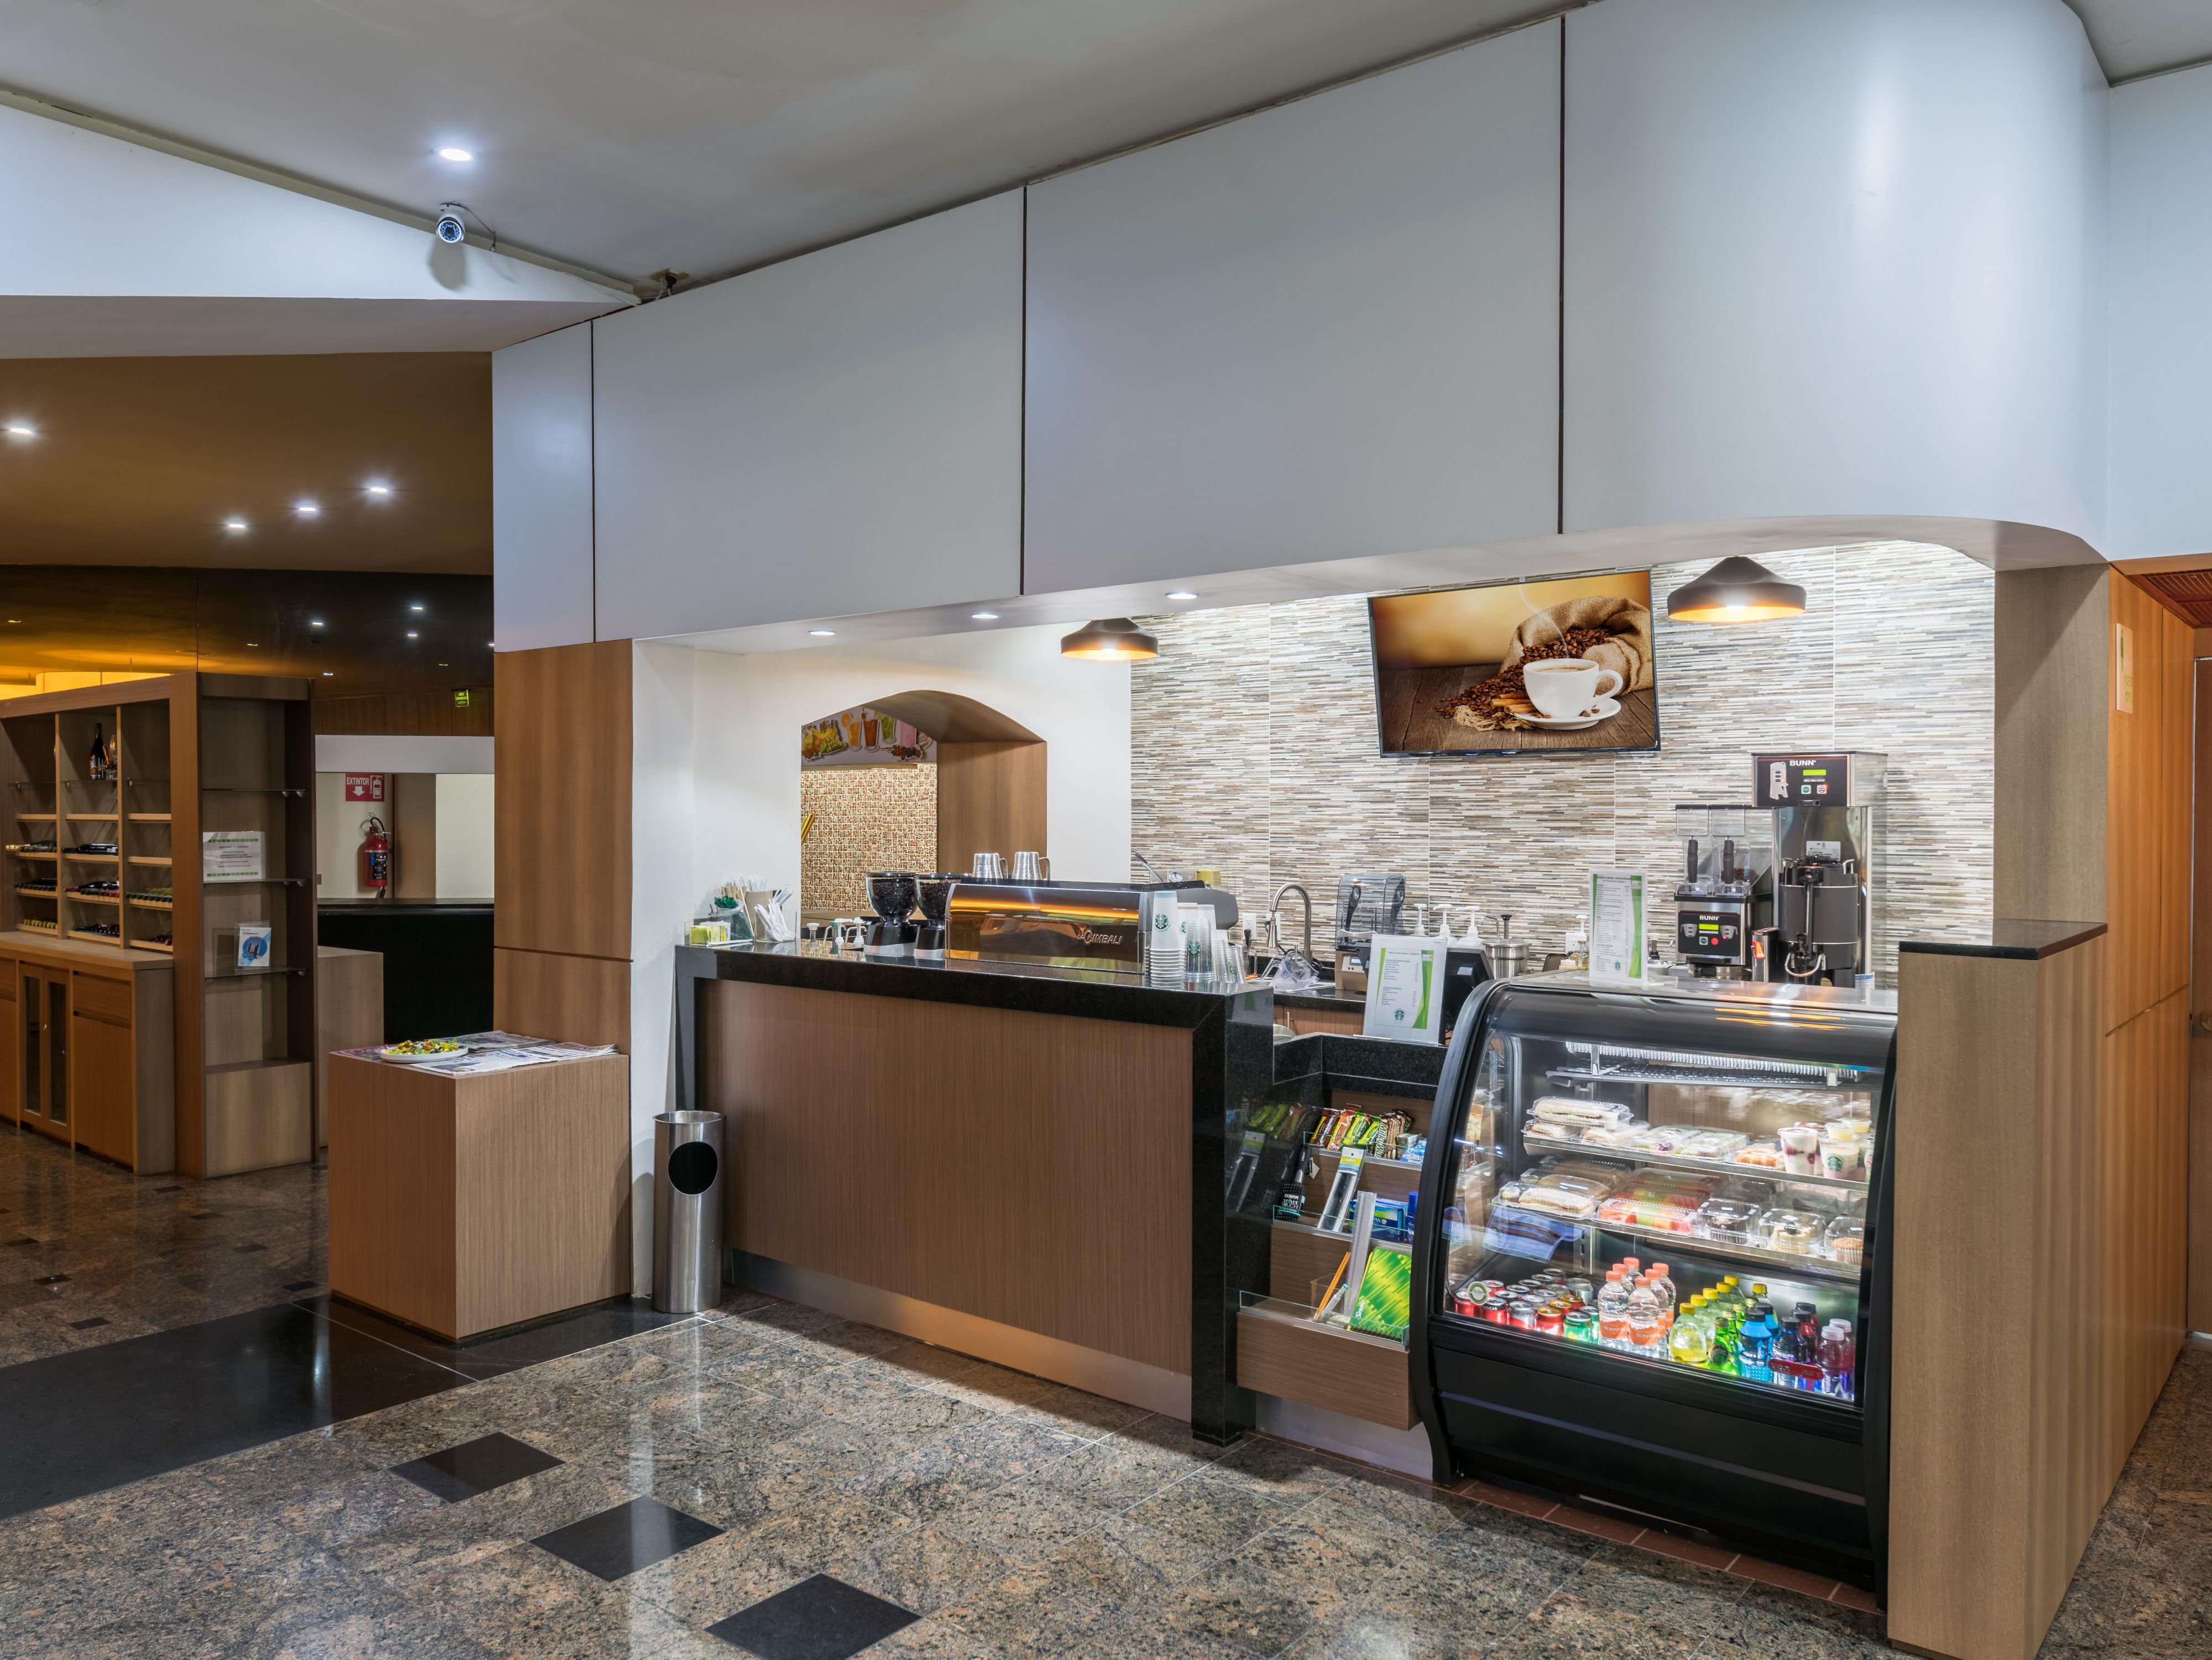 For coffee lovers, we have the best flavors of the We proudly Serve Starbucks Cafe, because we want to pamper you while you finish that important project or have a pleasant chat with your colleagues in our Co-Work, the perfect combination. There is no need to go out of the hotel.